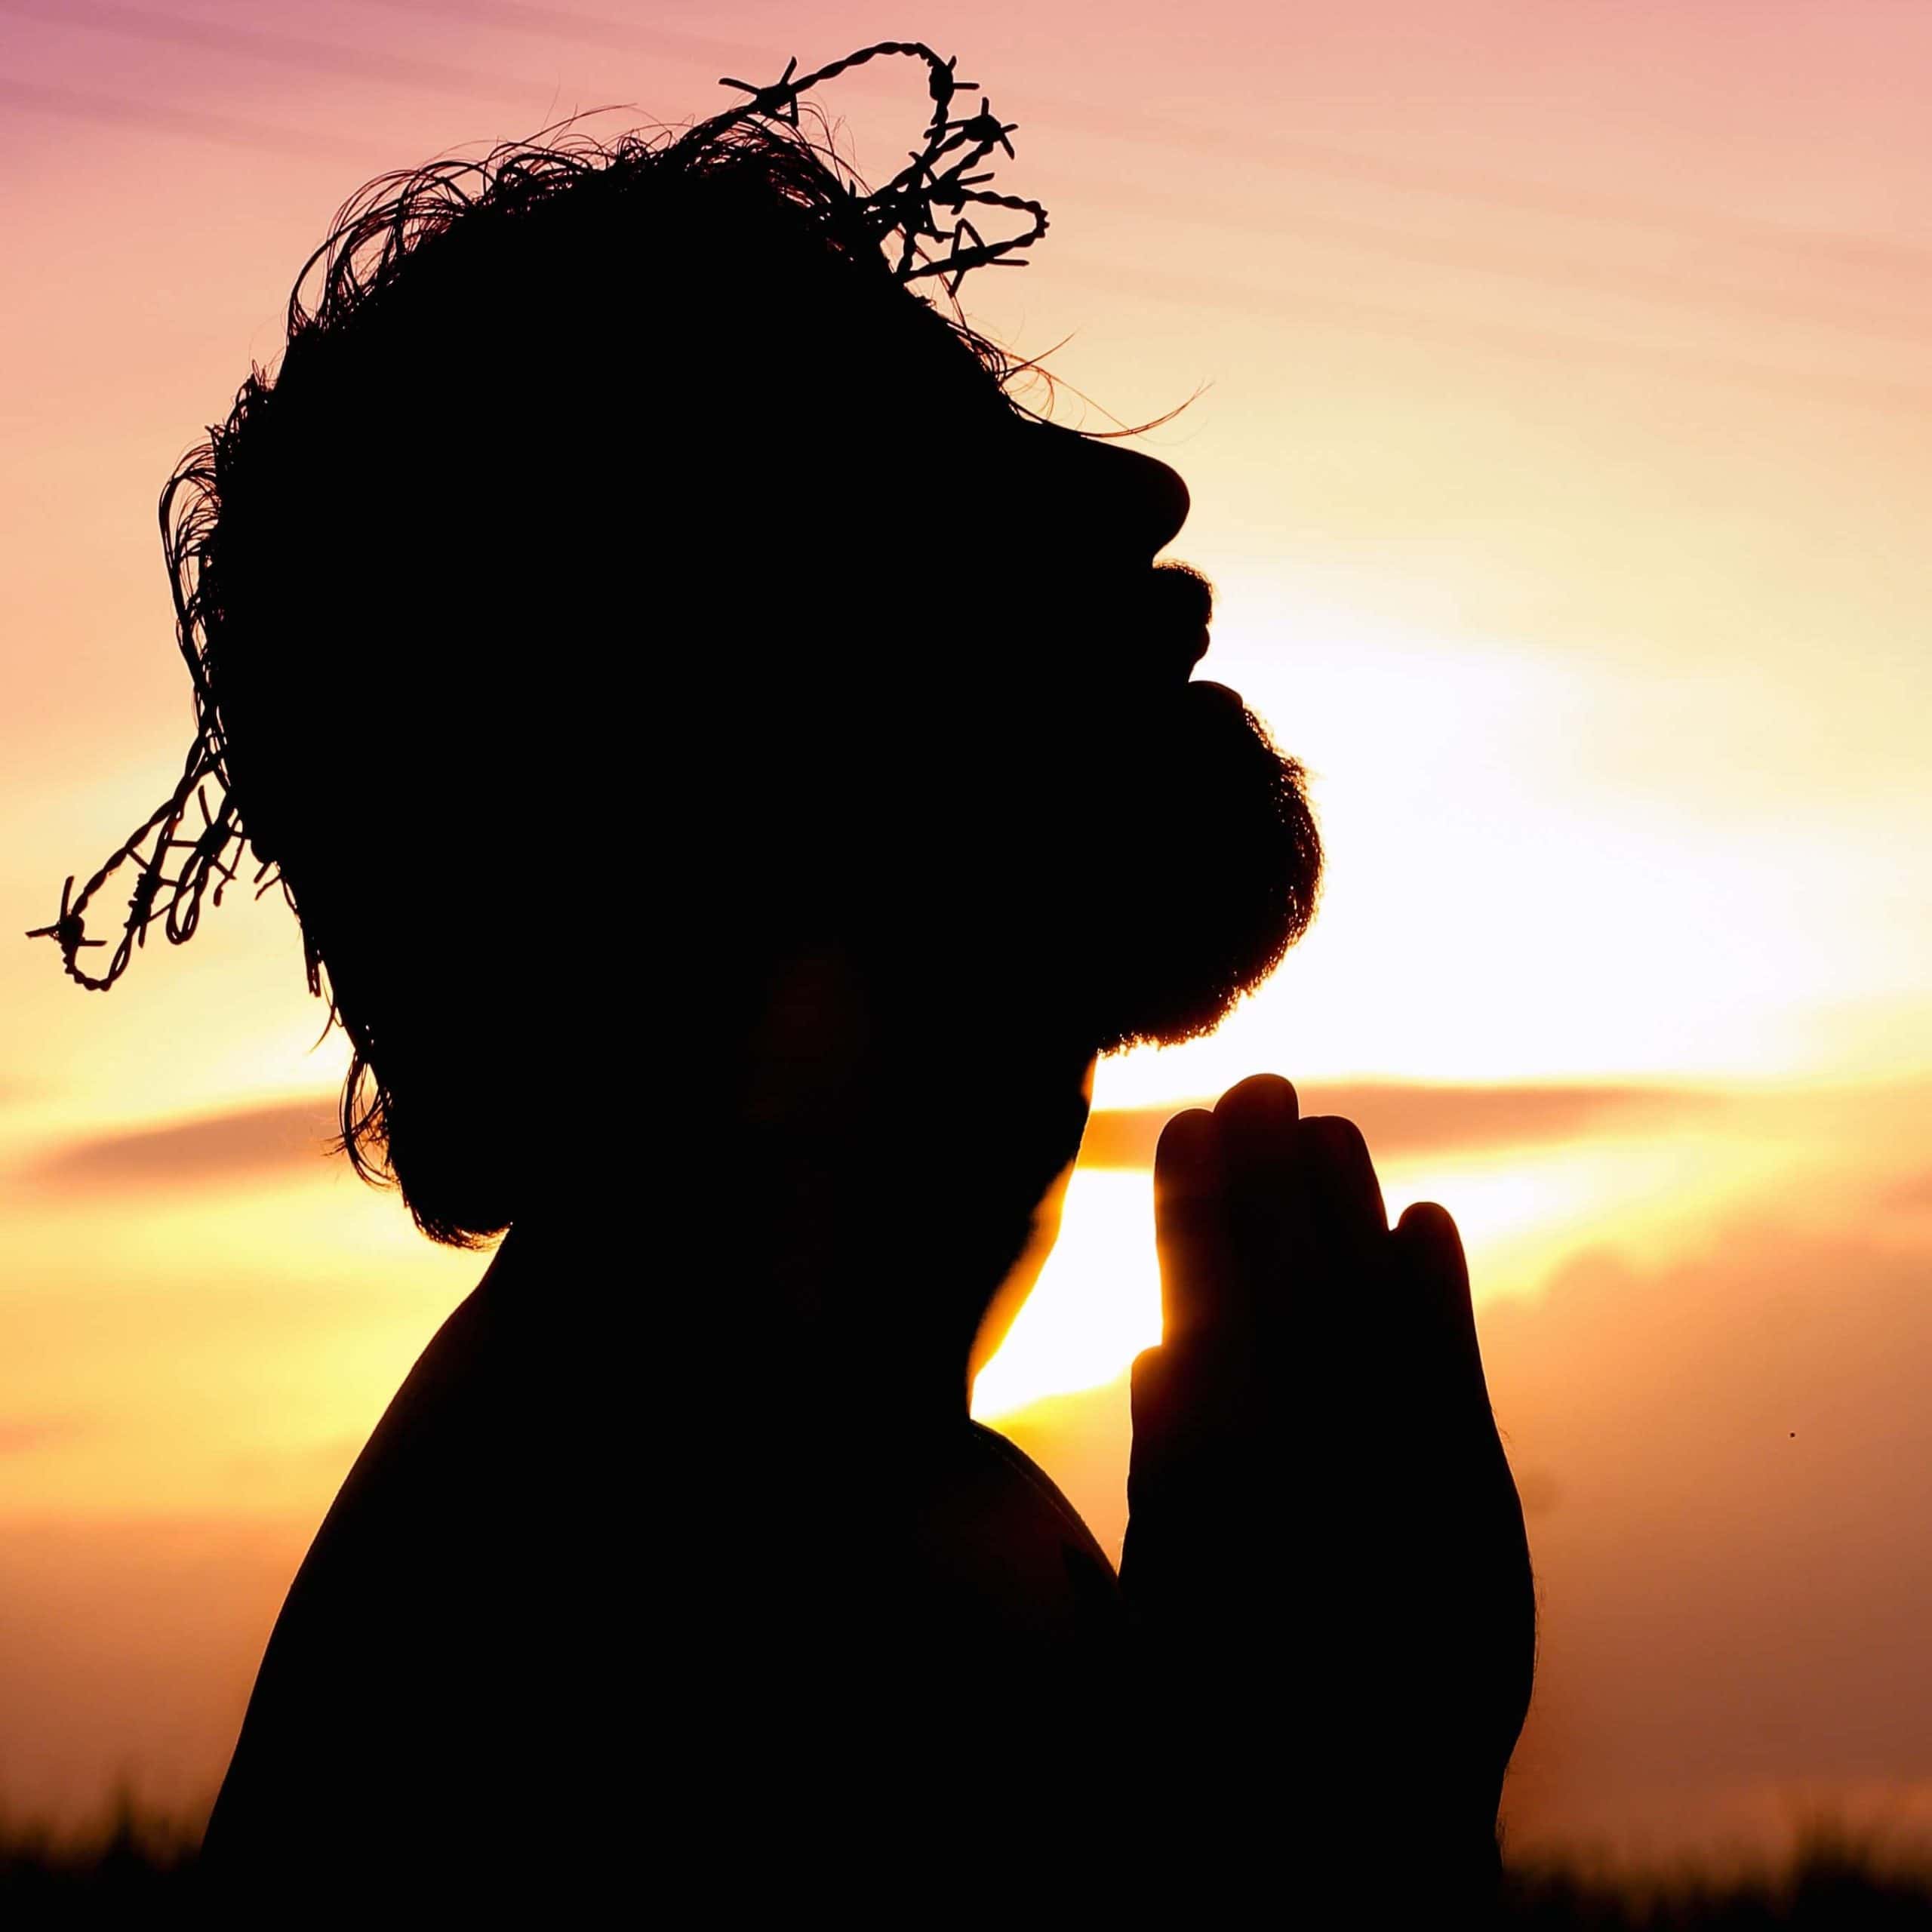 Silhouette of Jesus praying with crown of thorns on his head